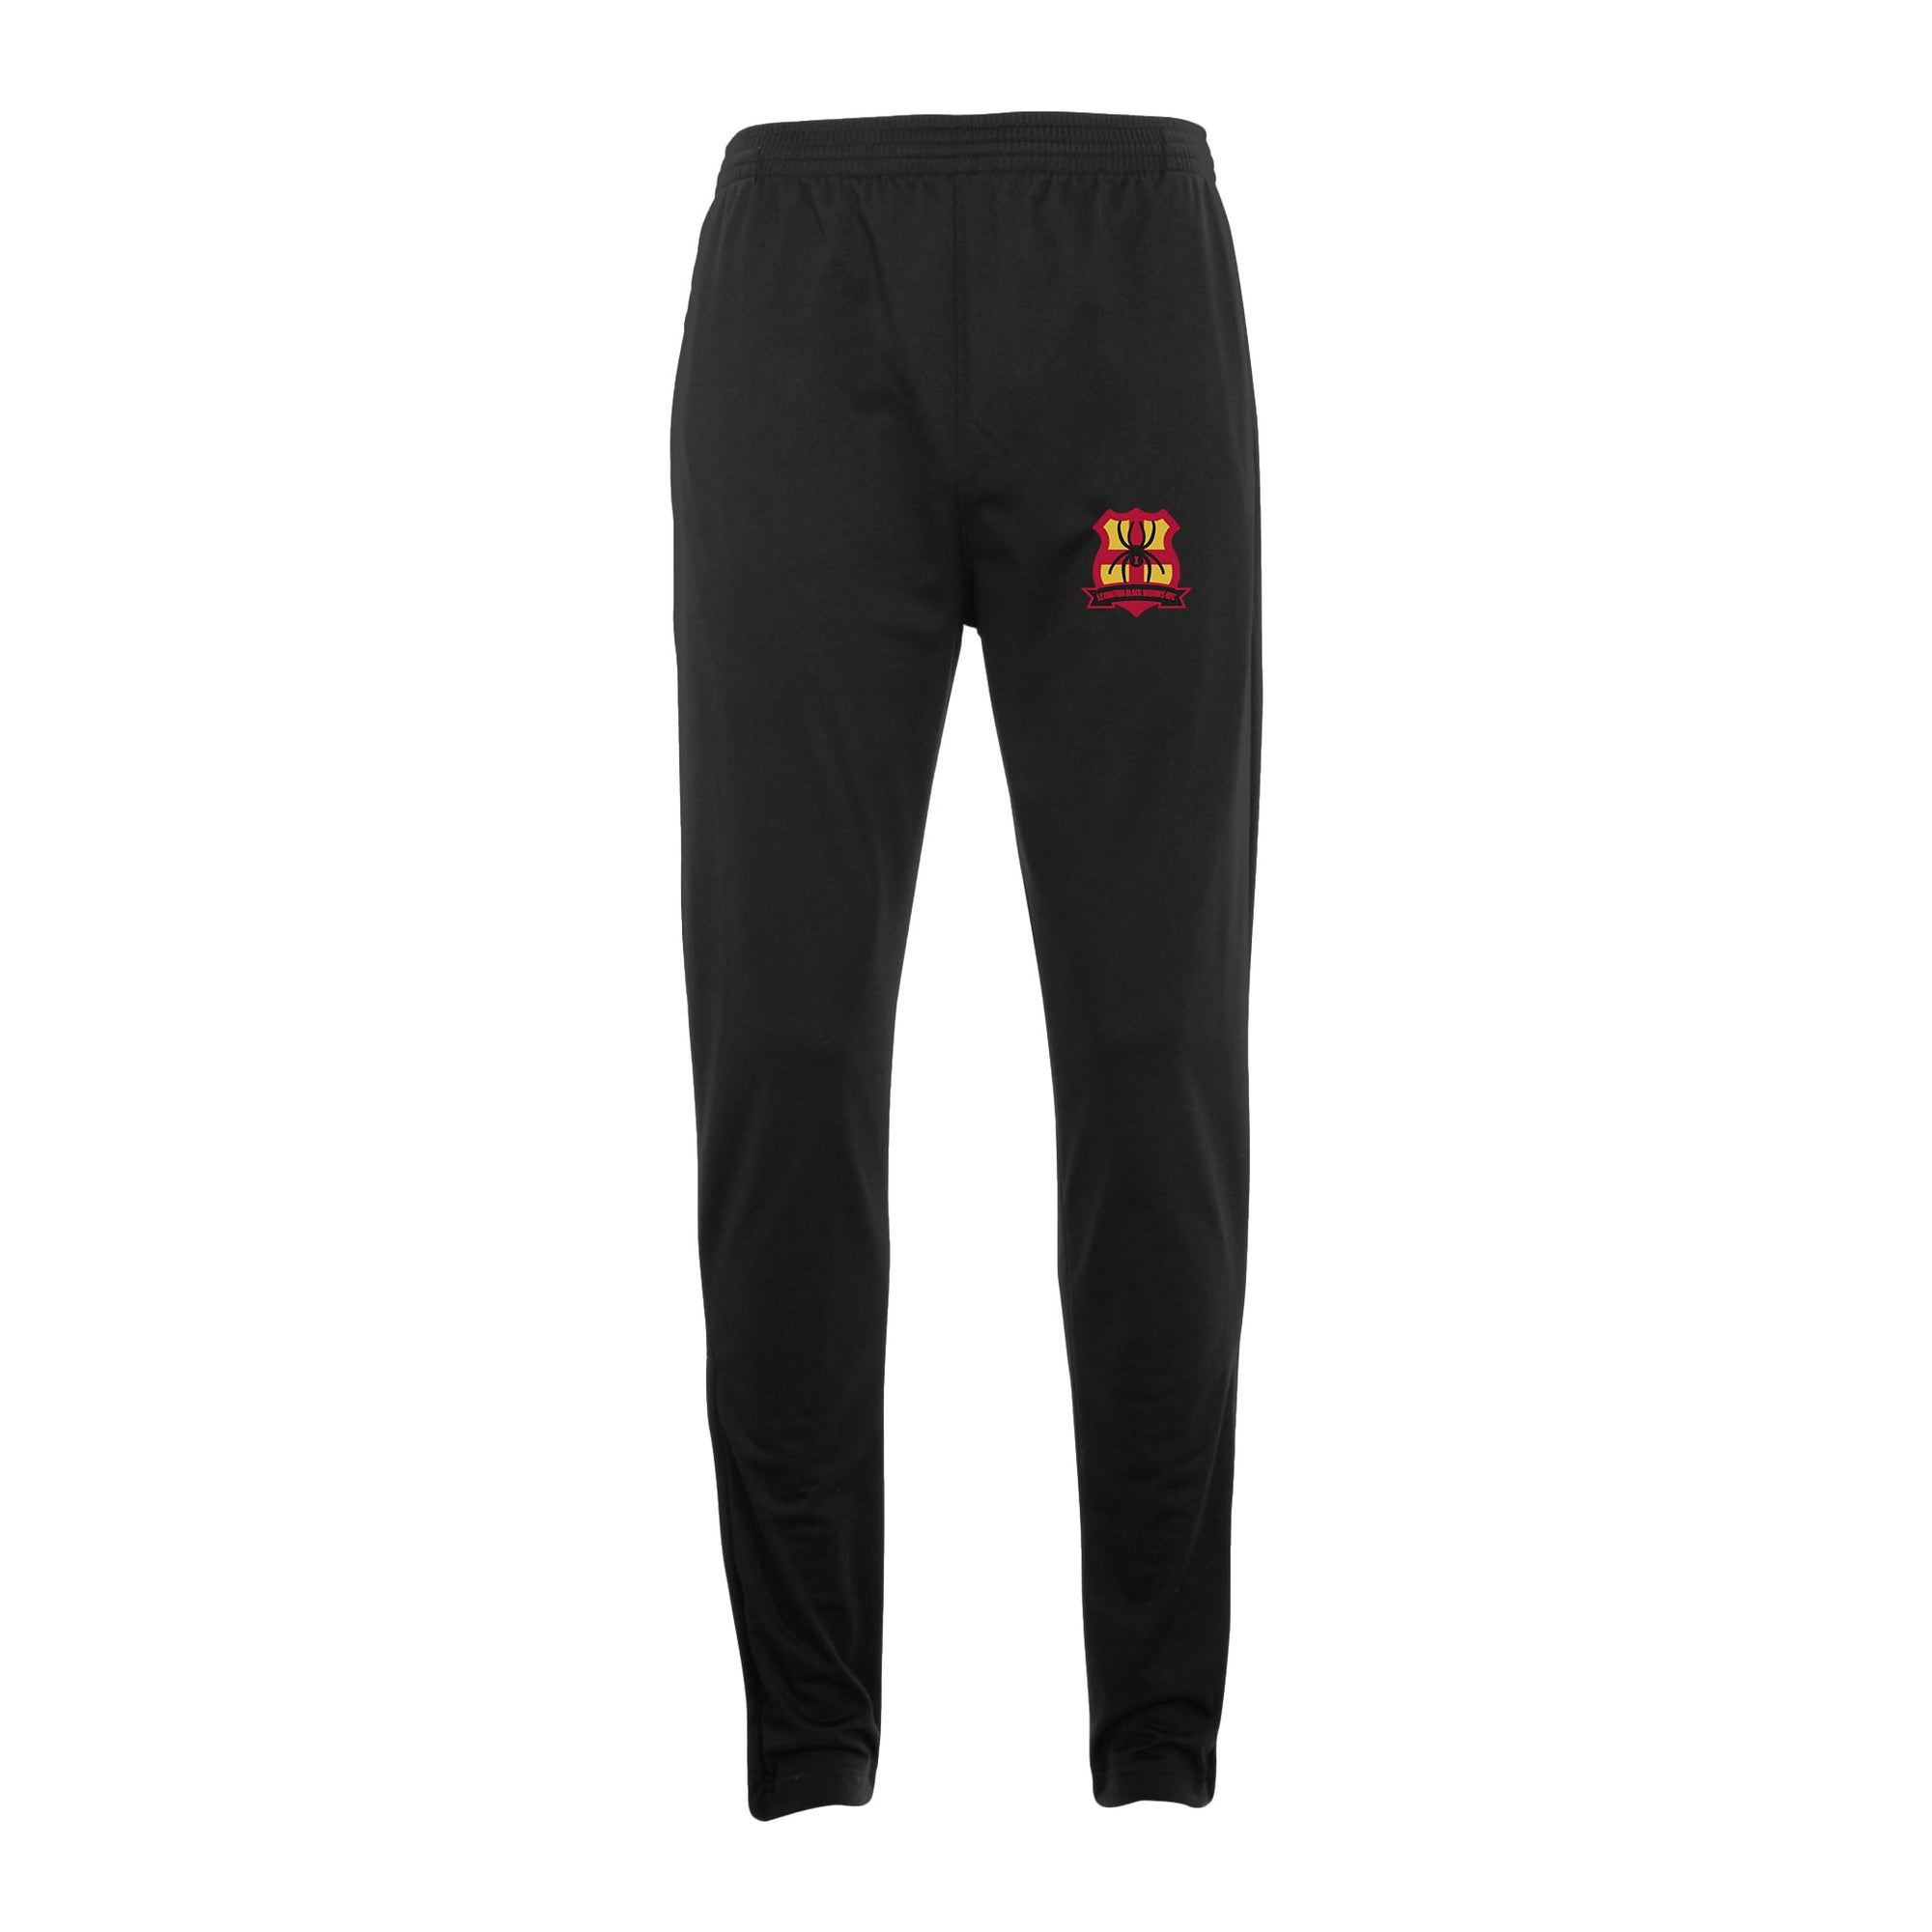 Rugby Imports Black Widows RFC Unisex Tapered Leg Pant